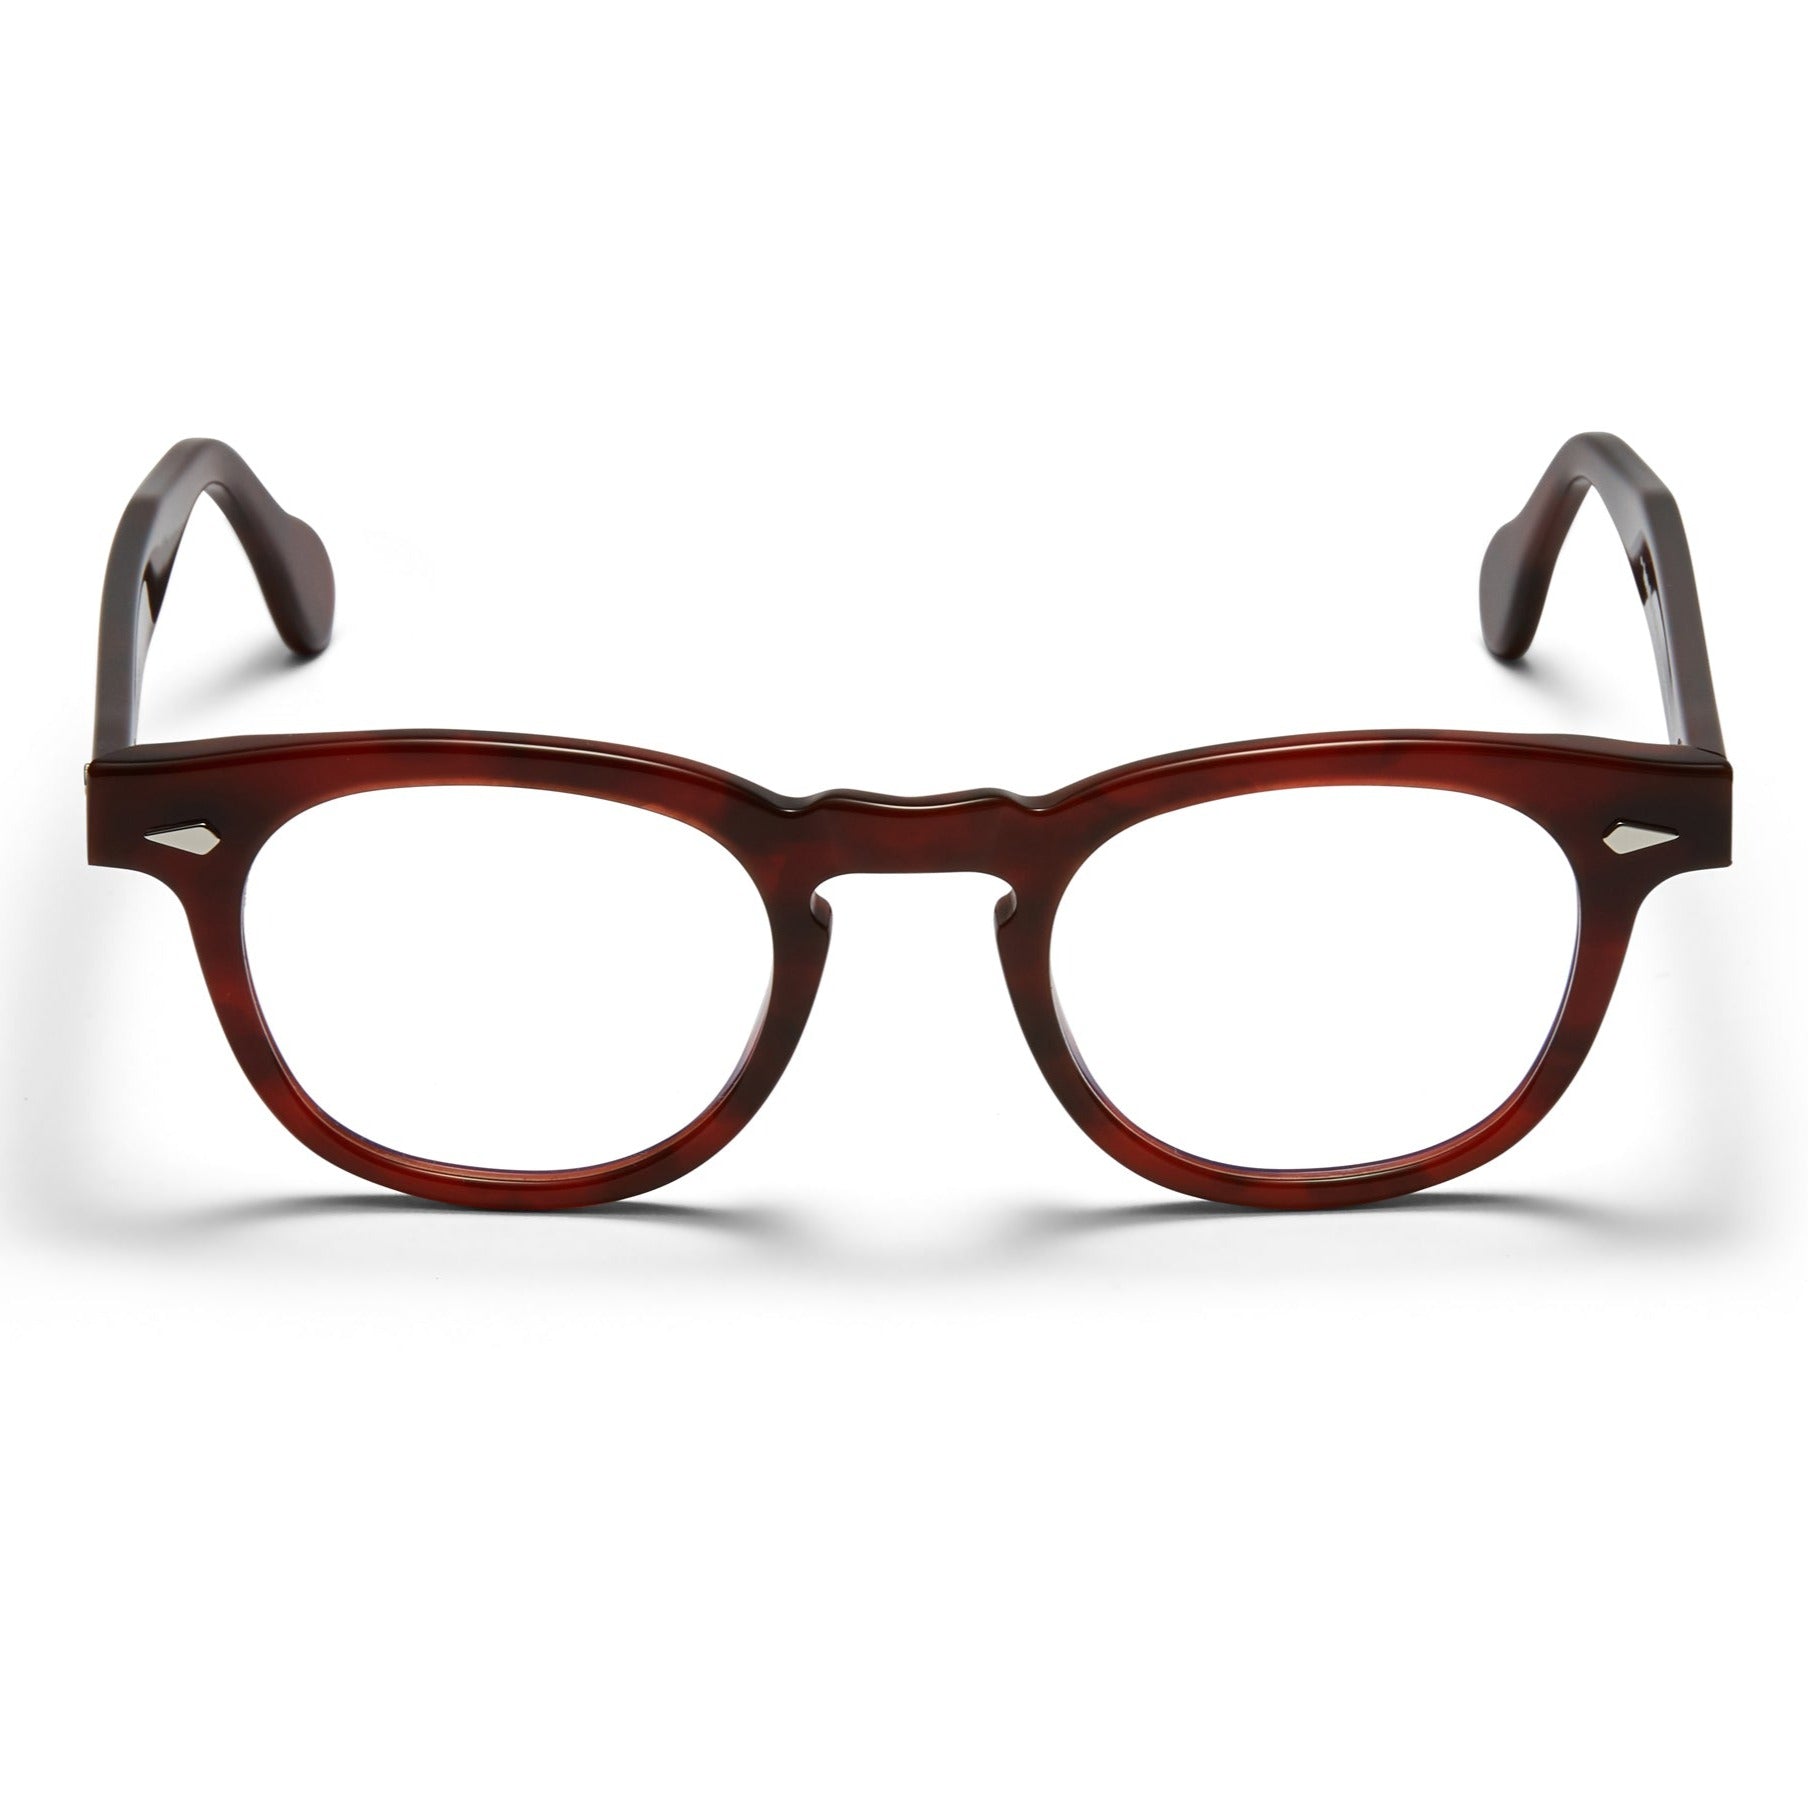 A front view of the burgundy Arnel USA frame—the Vintage eyewear. 